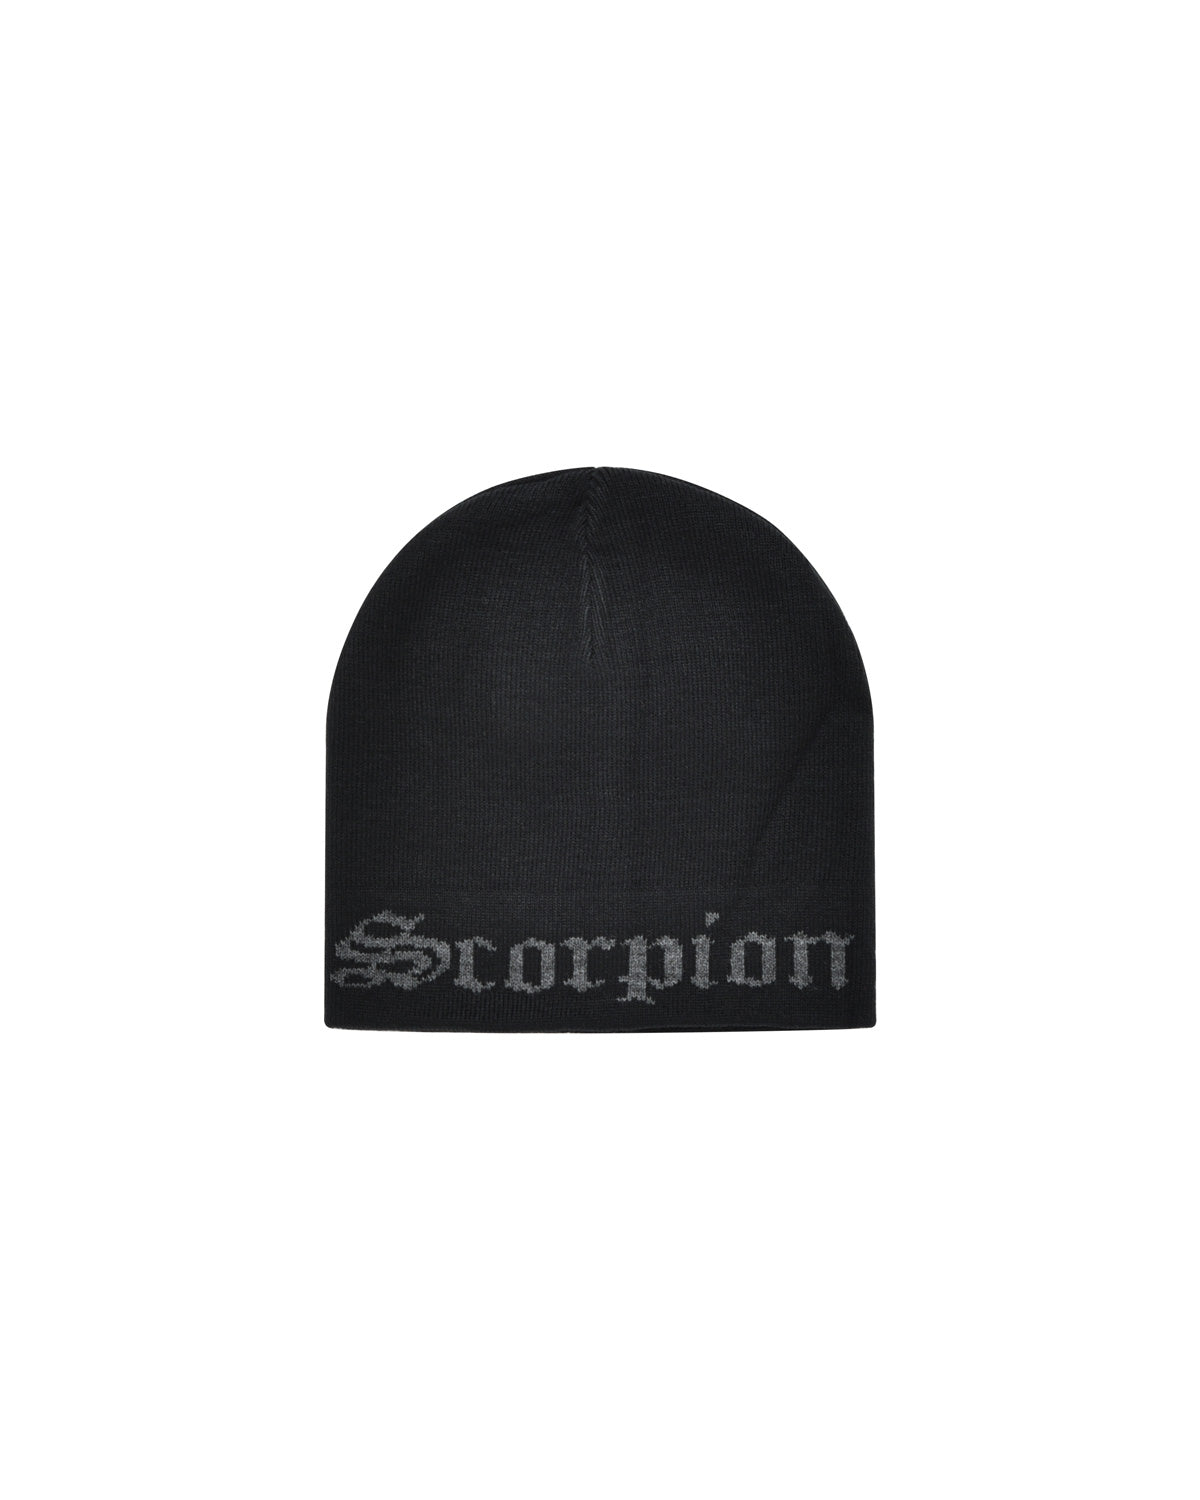 Doubleface Ritual Black Knitted Beanie